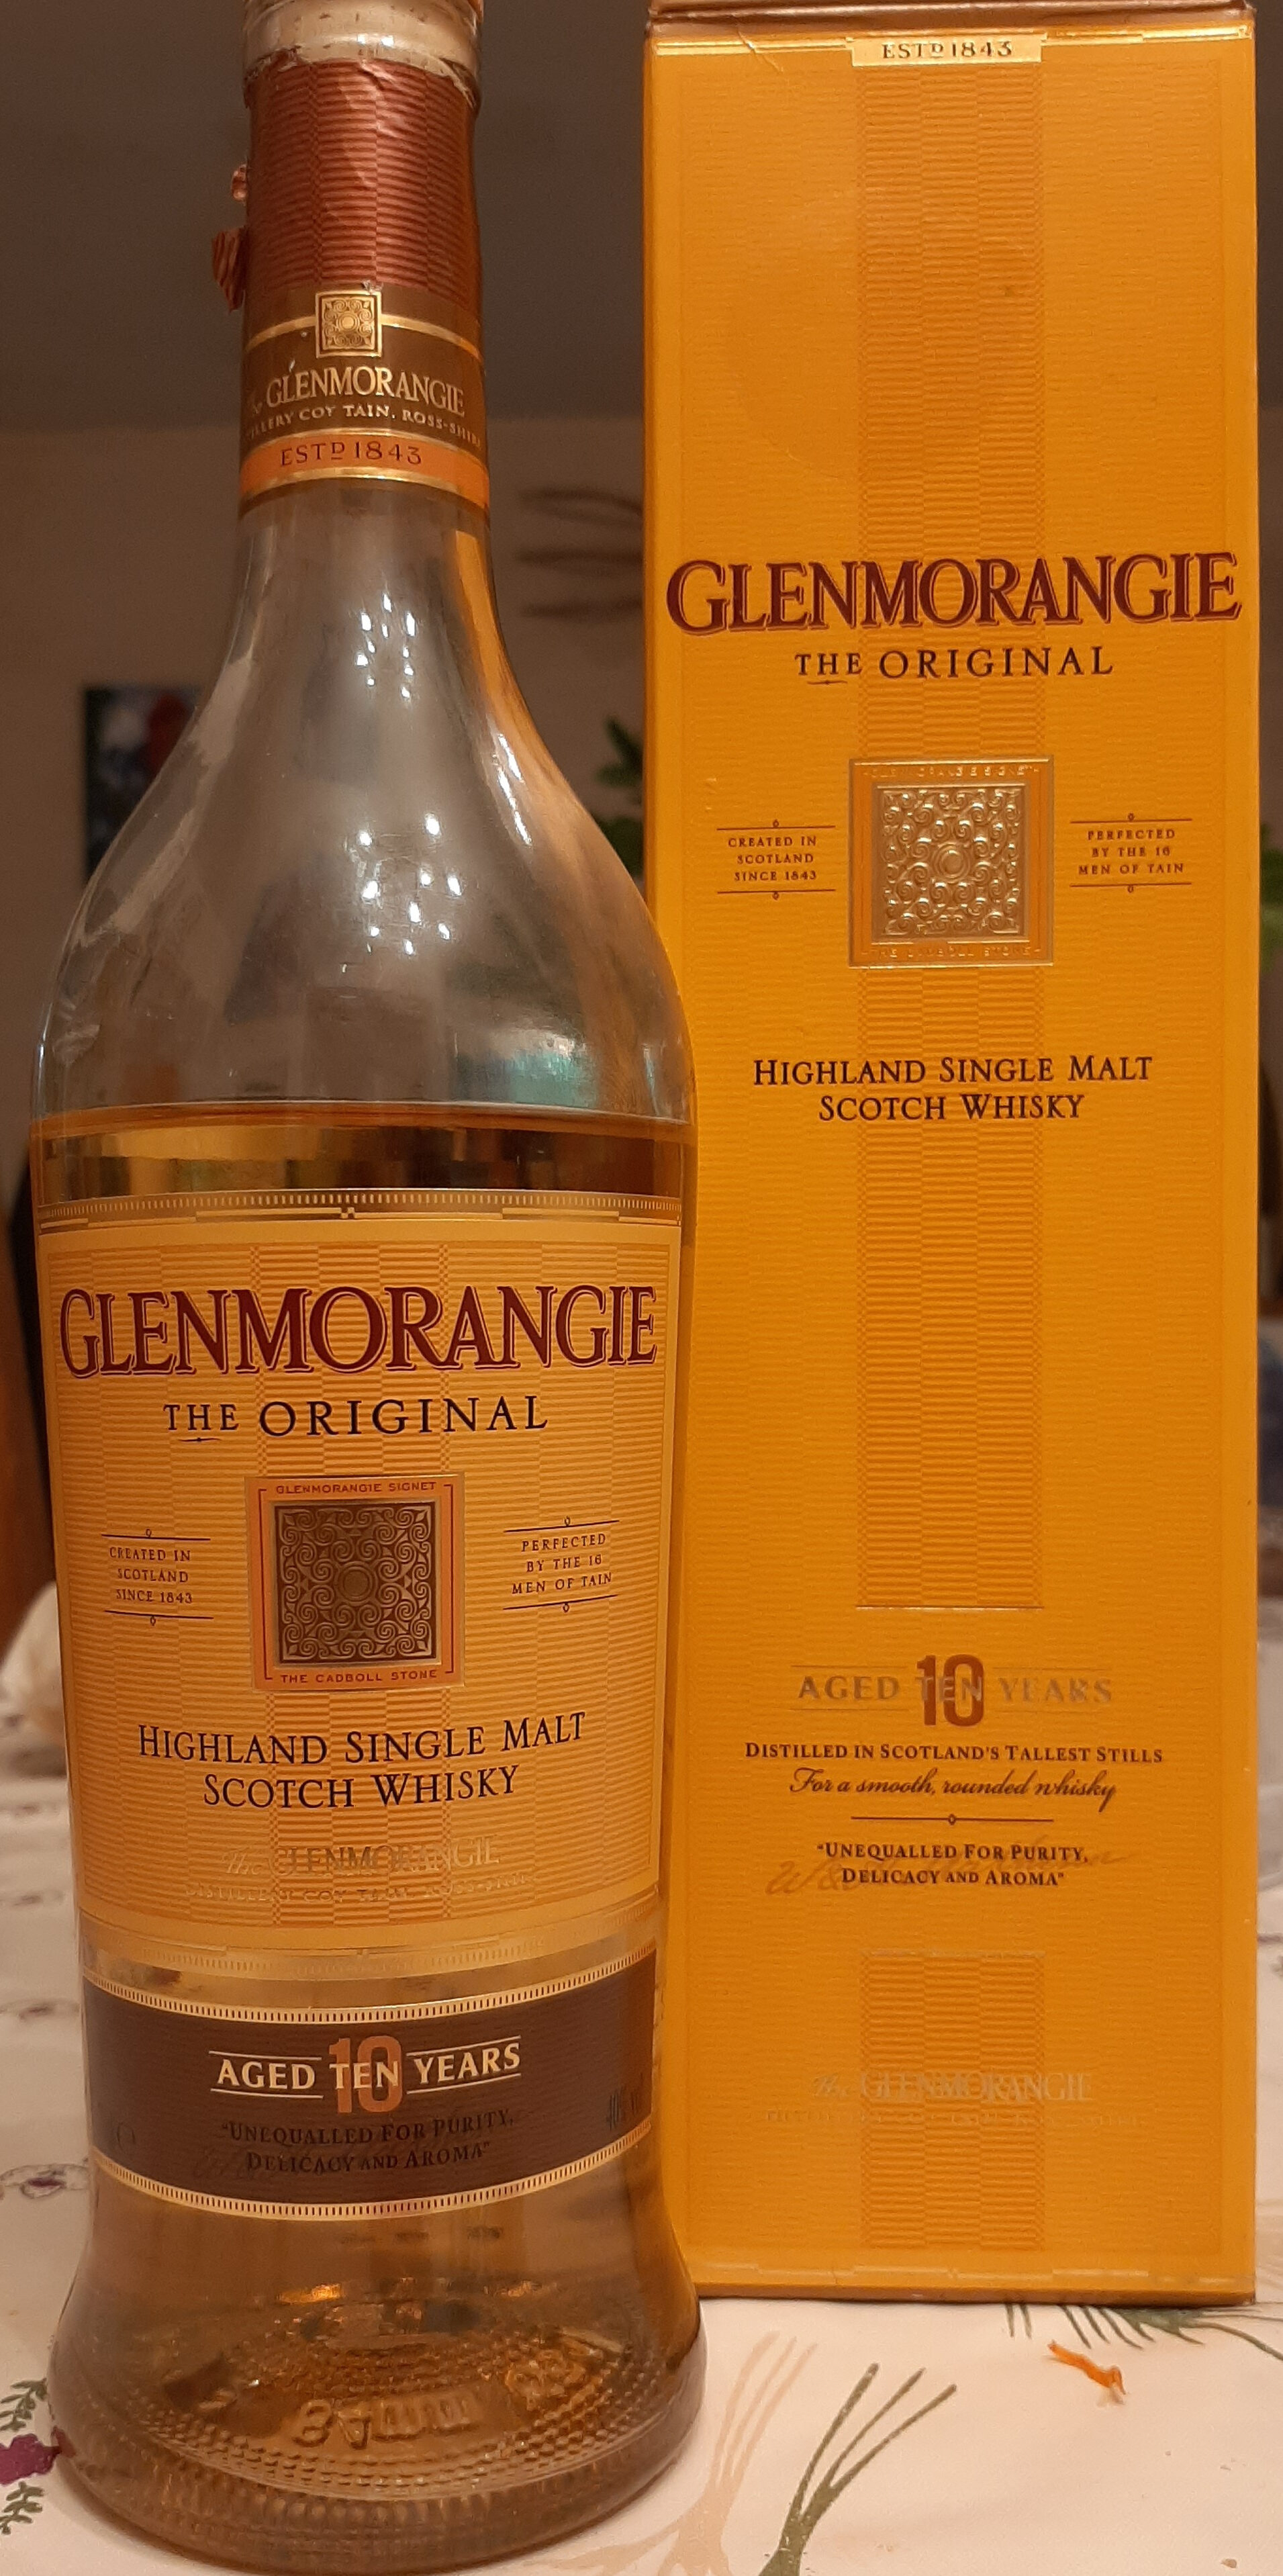 Highland single malt scotch Whisky - Recycling instructions and/or packaging information